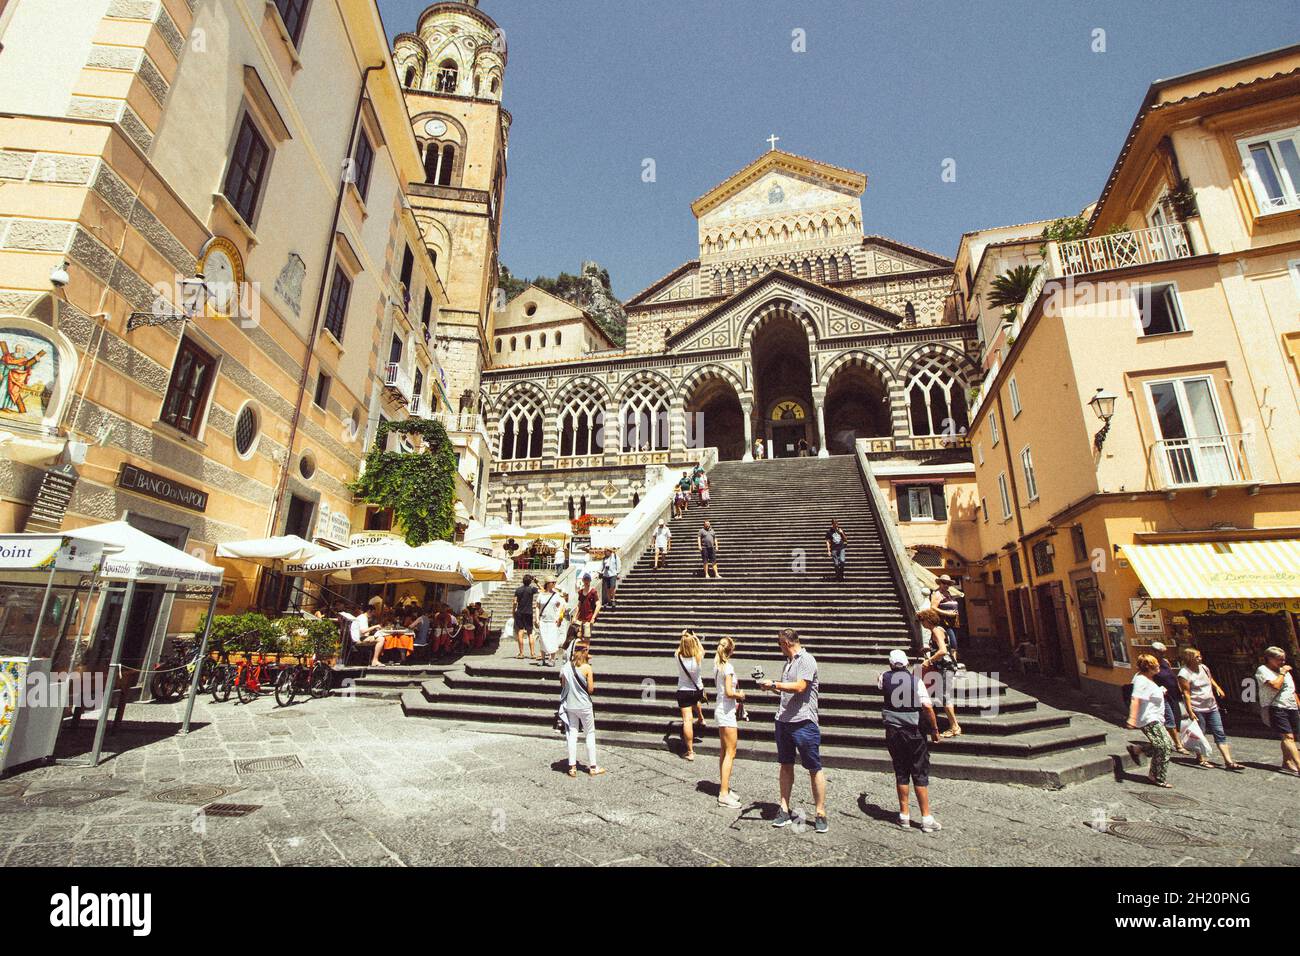 Amalfi is the main town of the coast on which it is located Amalfi Coast), and is today an important tourist destination. Stock Photo